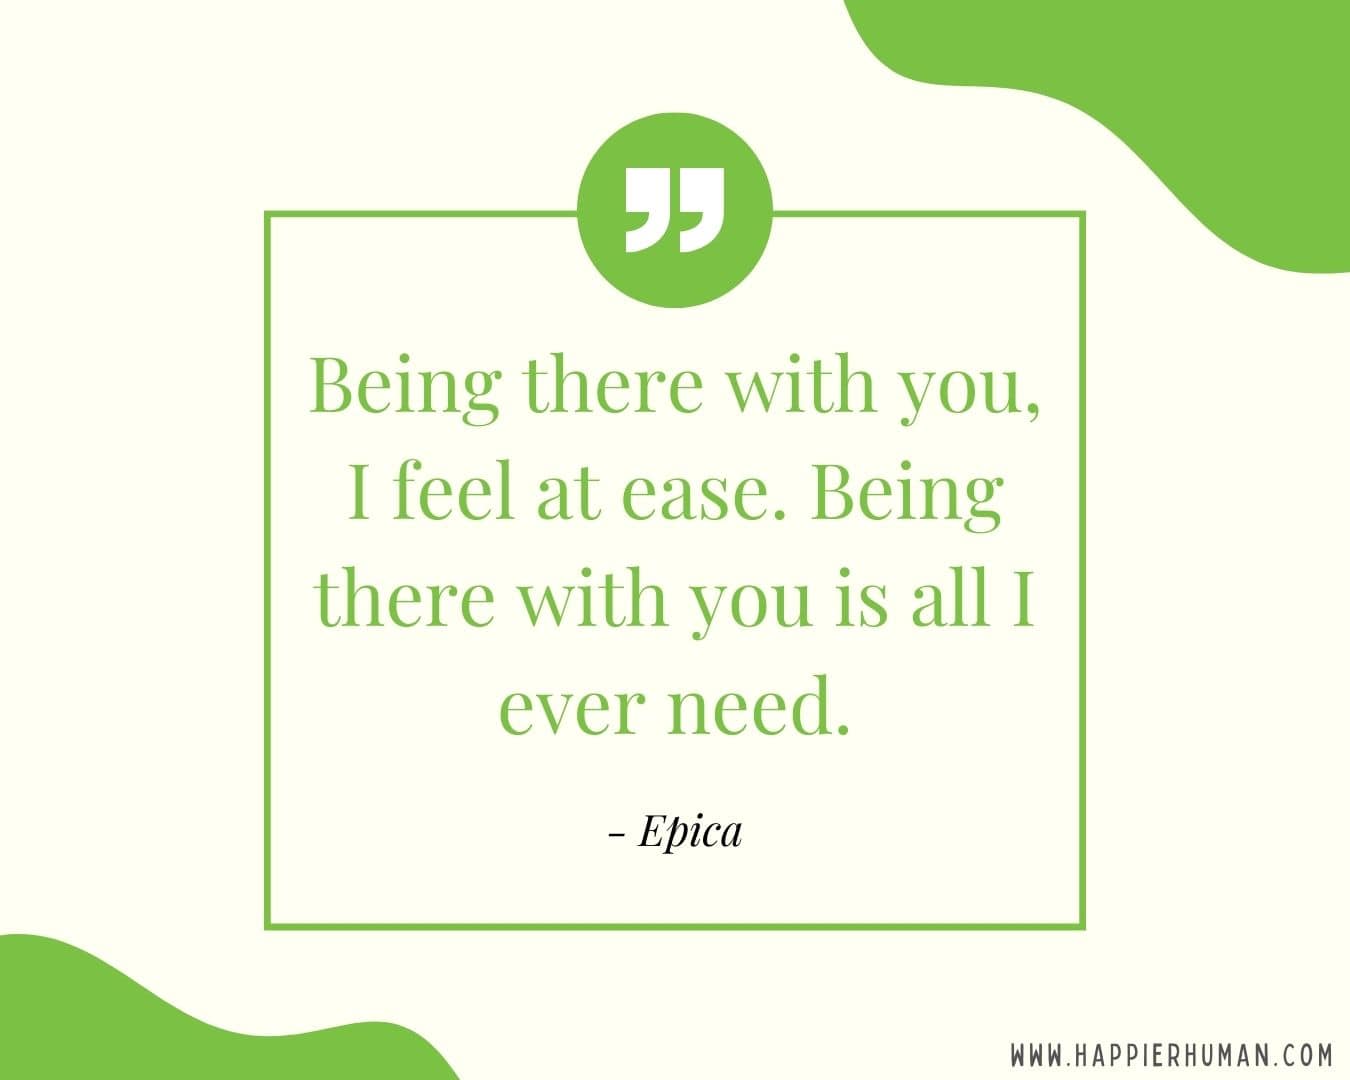 I’m Here for You Quotes - “Being there with you, I feel at ease. Being there with you is all I ever need.” – Epica